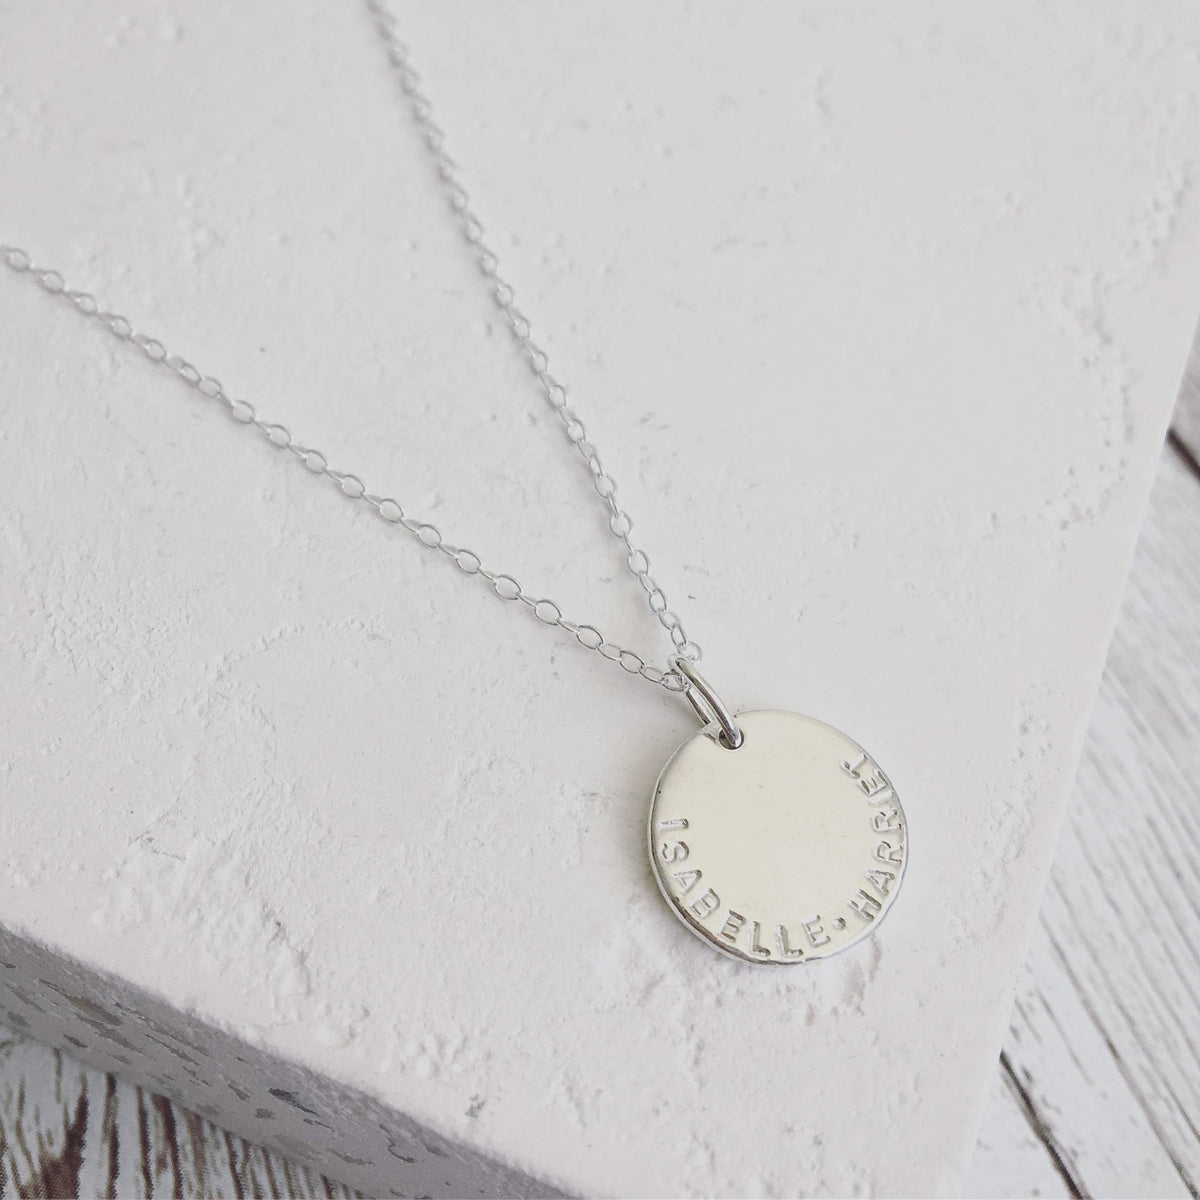 Personalised Silver Disc Necklace